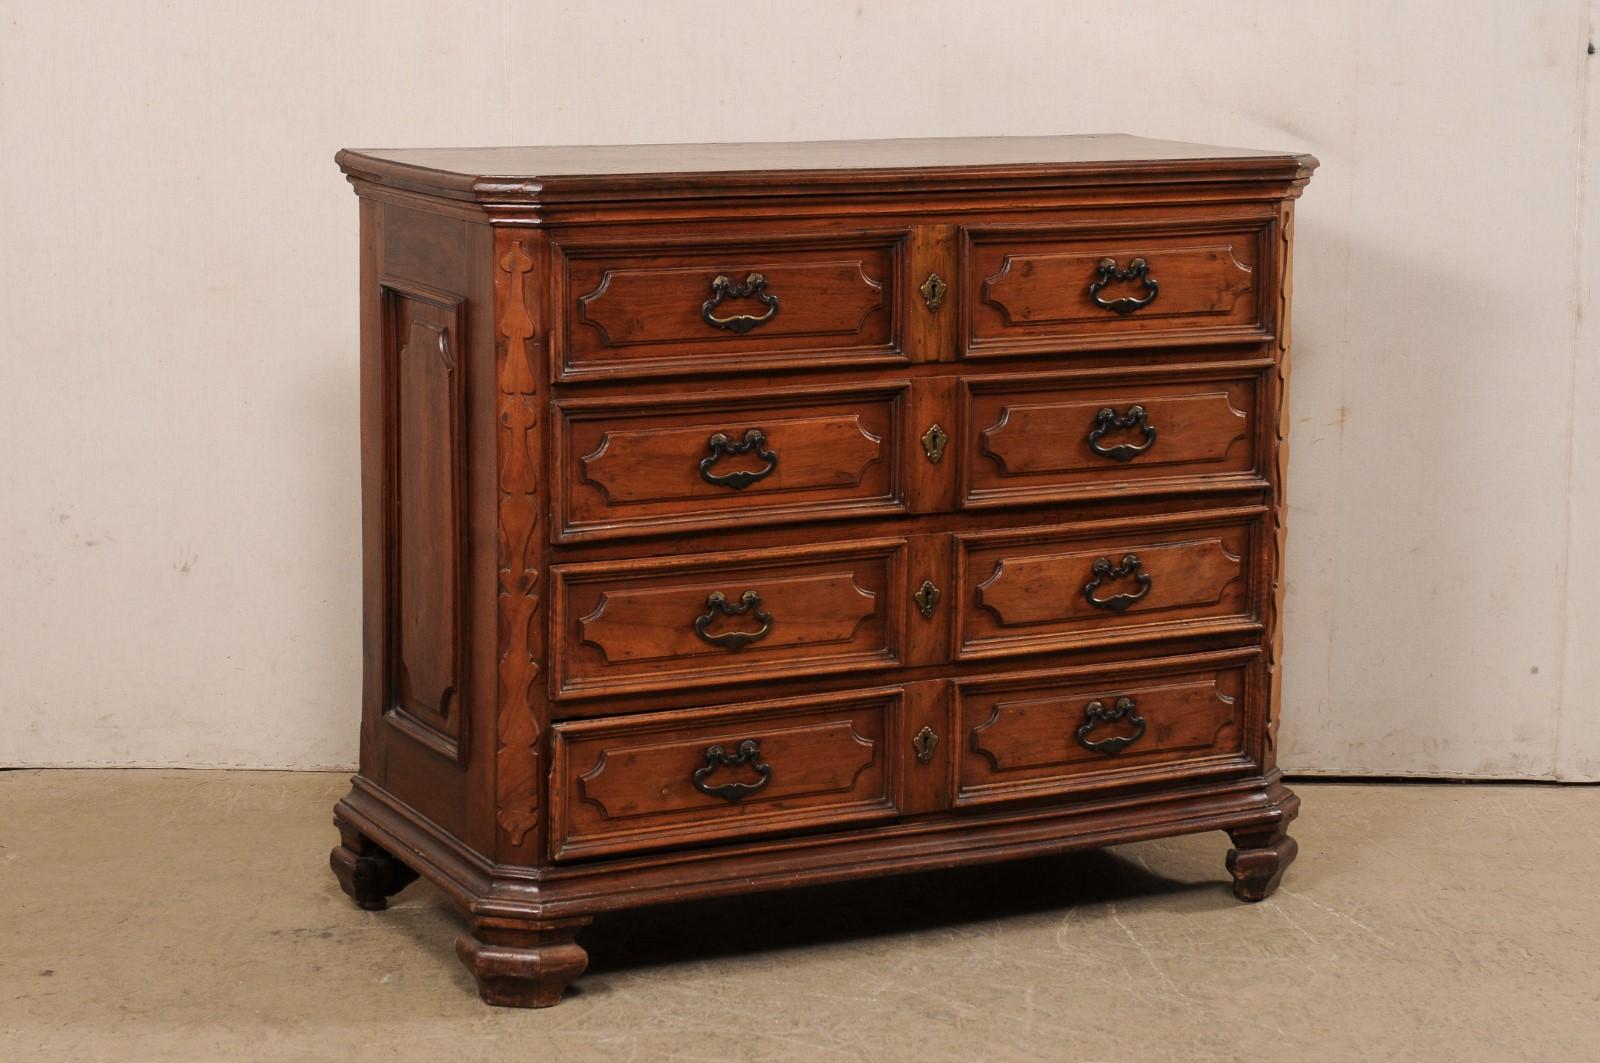 An Italian walnut chest of drawers from the 18th century. This antique cassettiera (chest of drawers) from Italy features a rectangular-shaped top with canted front corners, atop case which houses four graduated drawers, flanked within fluted and